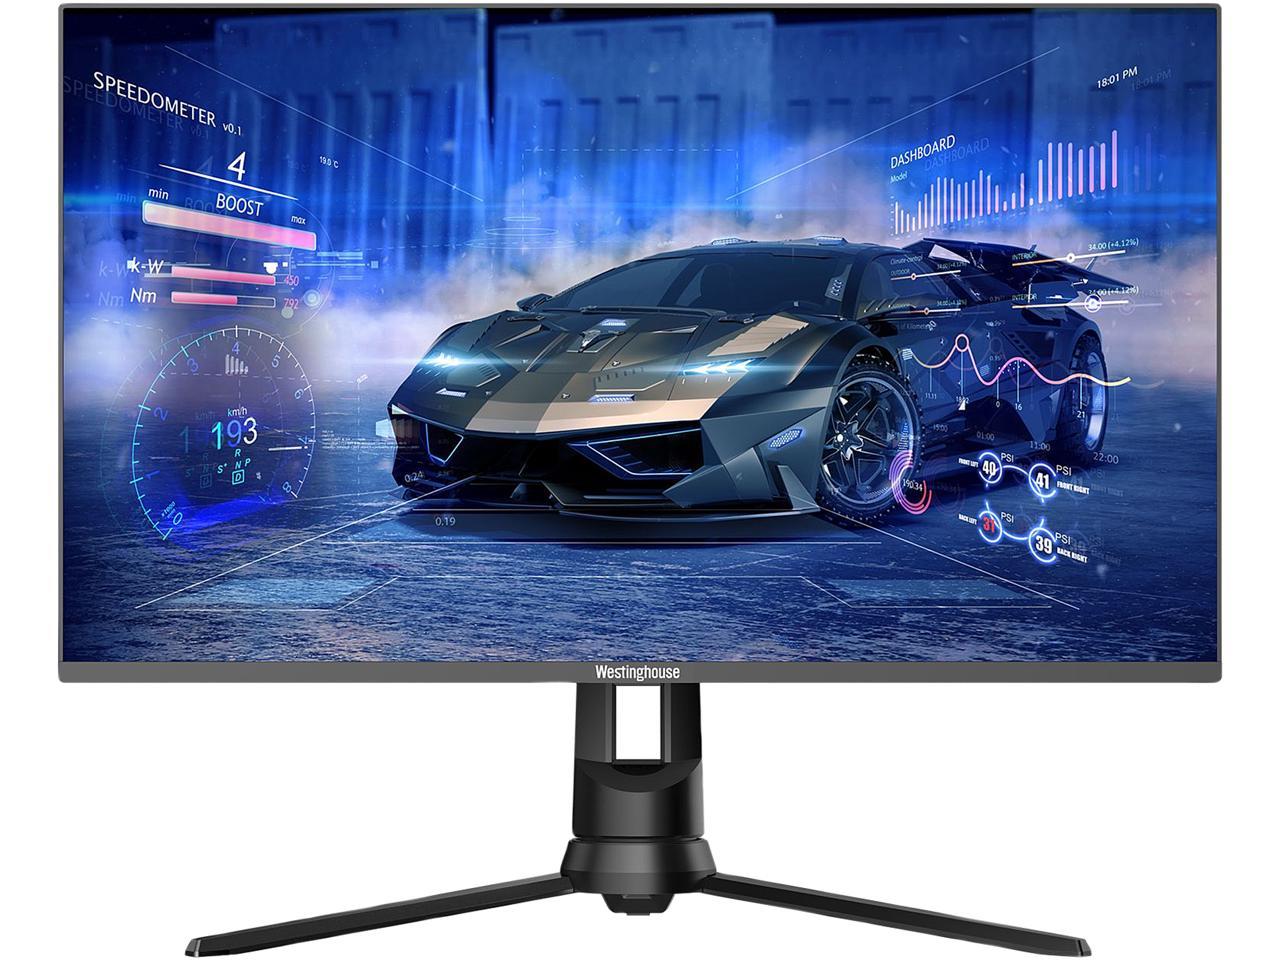 32" 1440p QHD Westinghouse 144 Hz monitor for $230 + $5 shipping